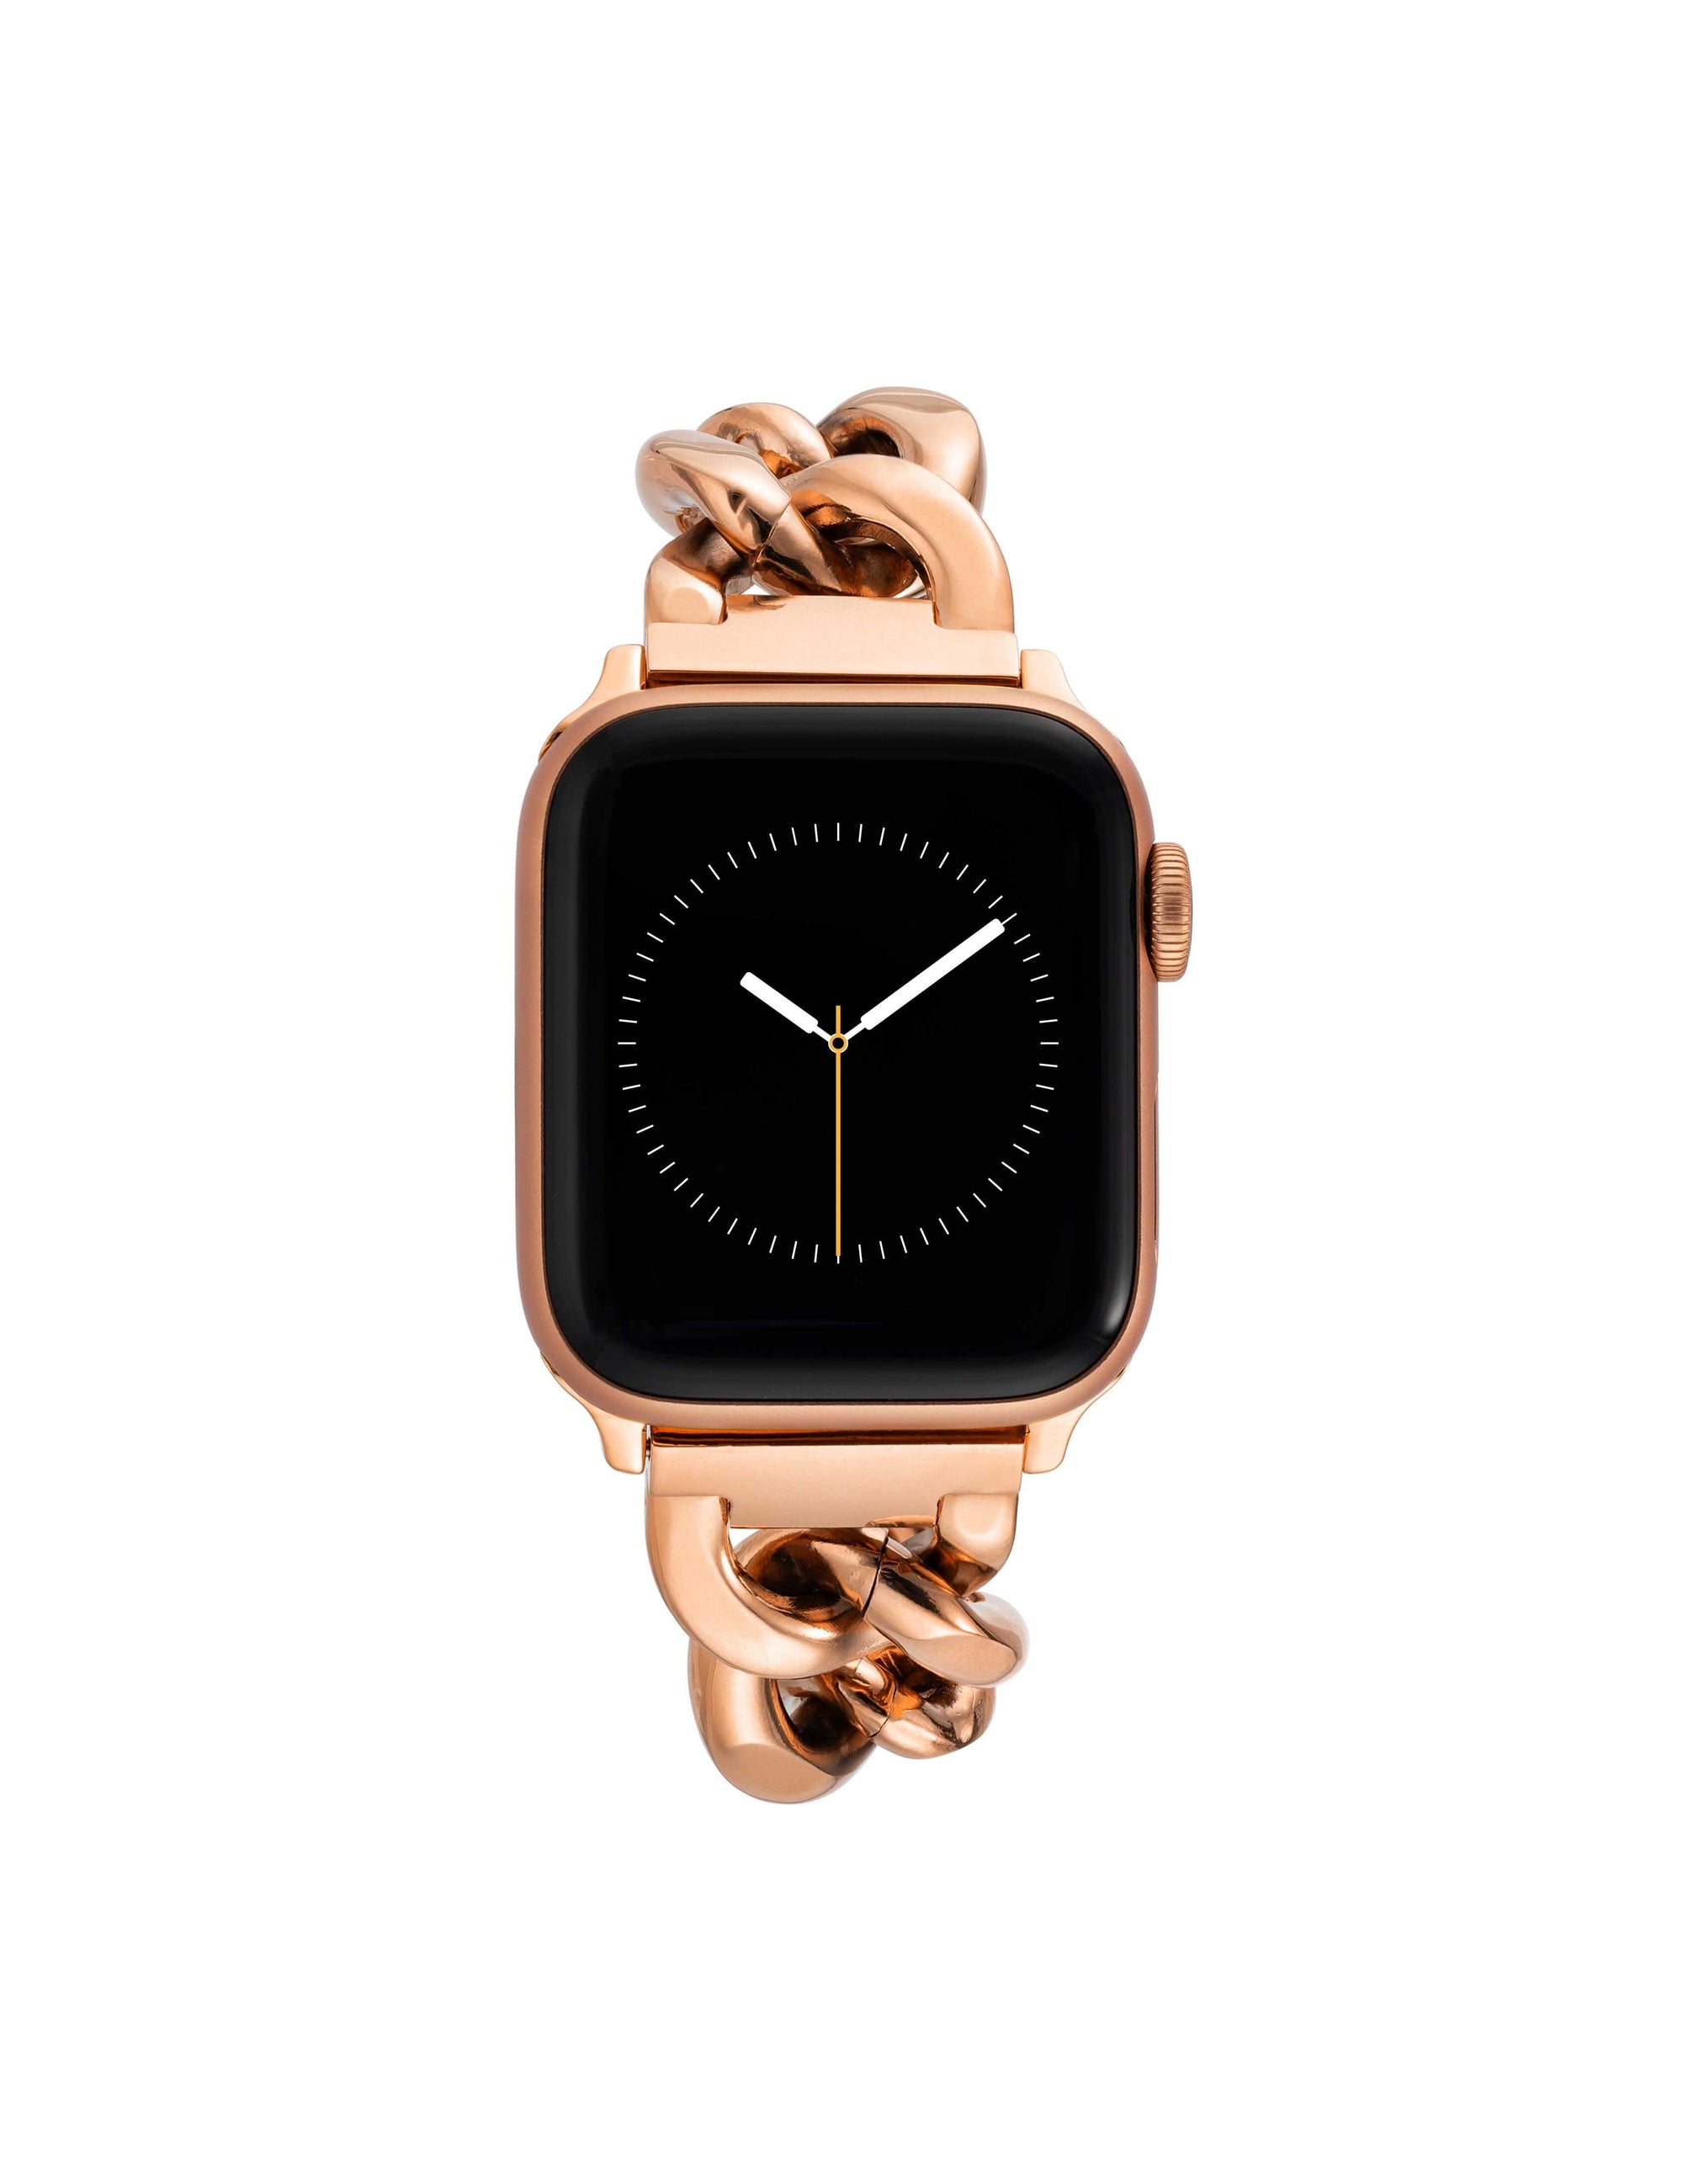 PLTGOOD 18K Gold Plated Apple Watch Band Compatible India | Ubuy